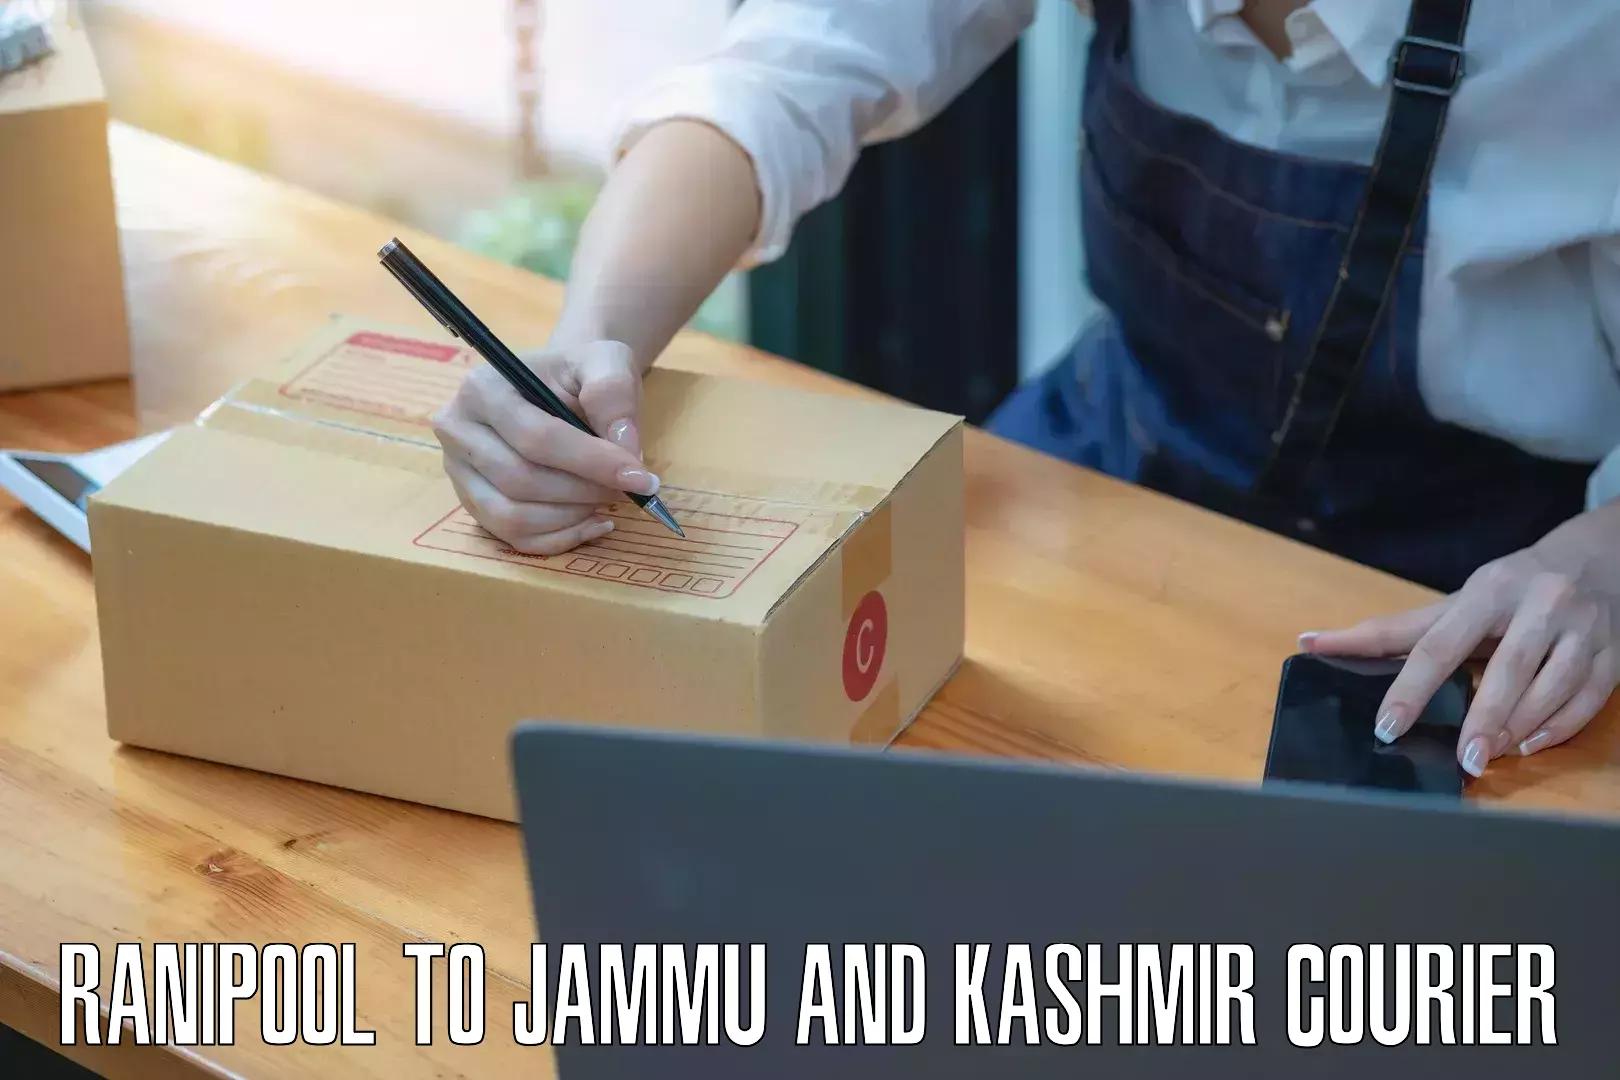 Supply chain delivery Ranipool to Jammu and Kashmir